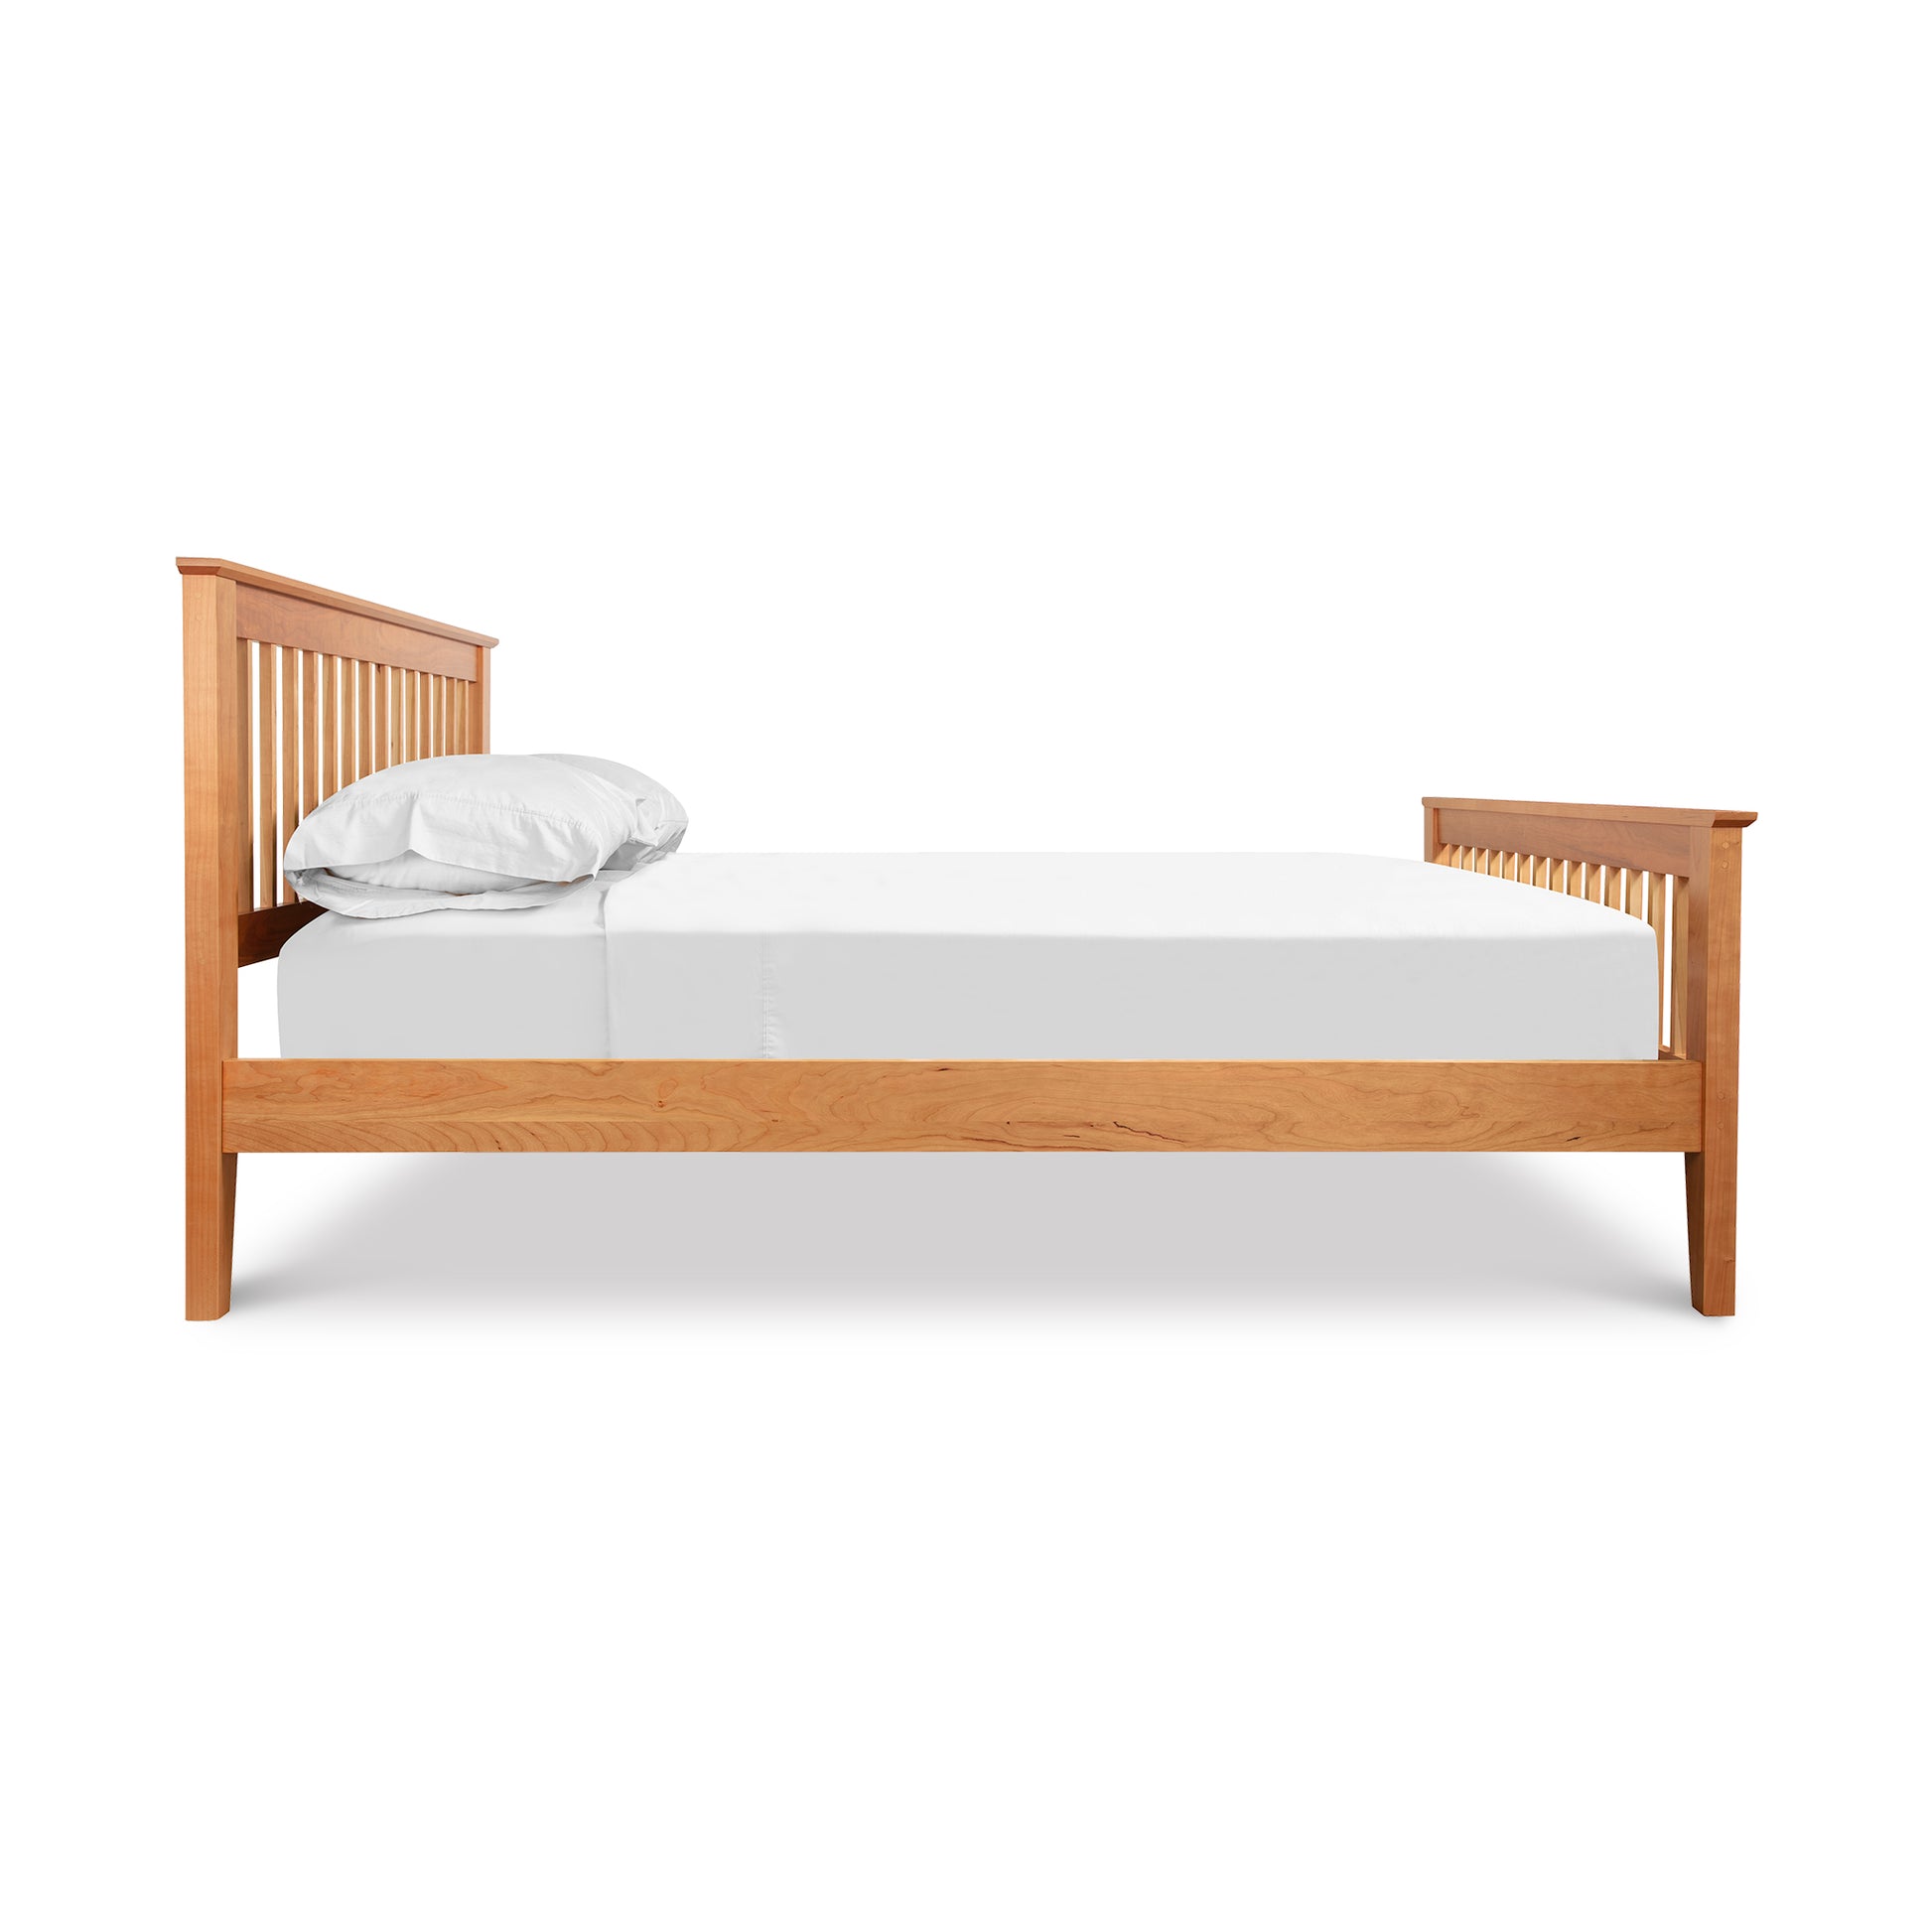 A high-quality, Lyndon Furniture American Mission Bed with a mission-style design and white sheets on it.